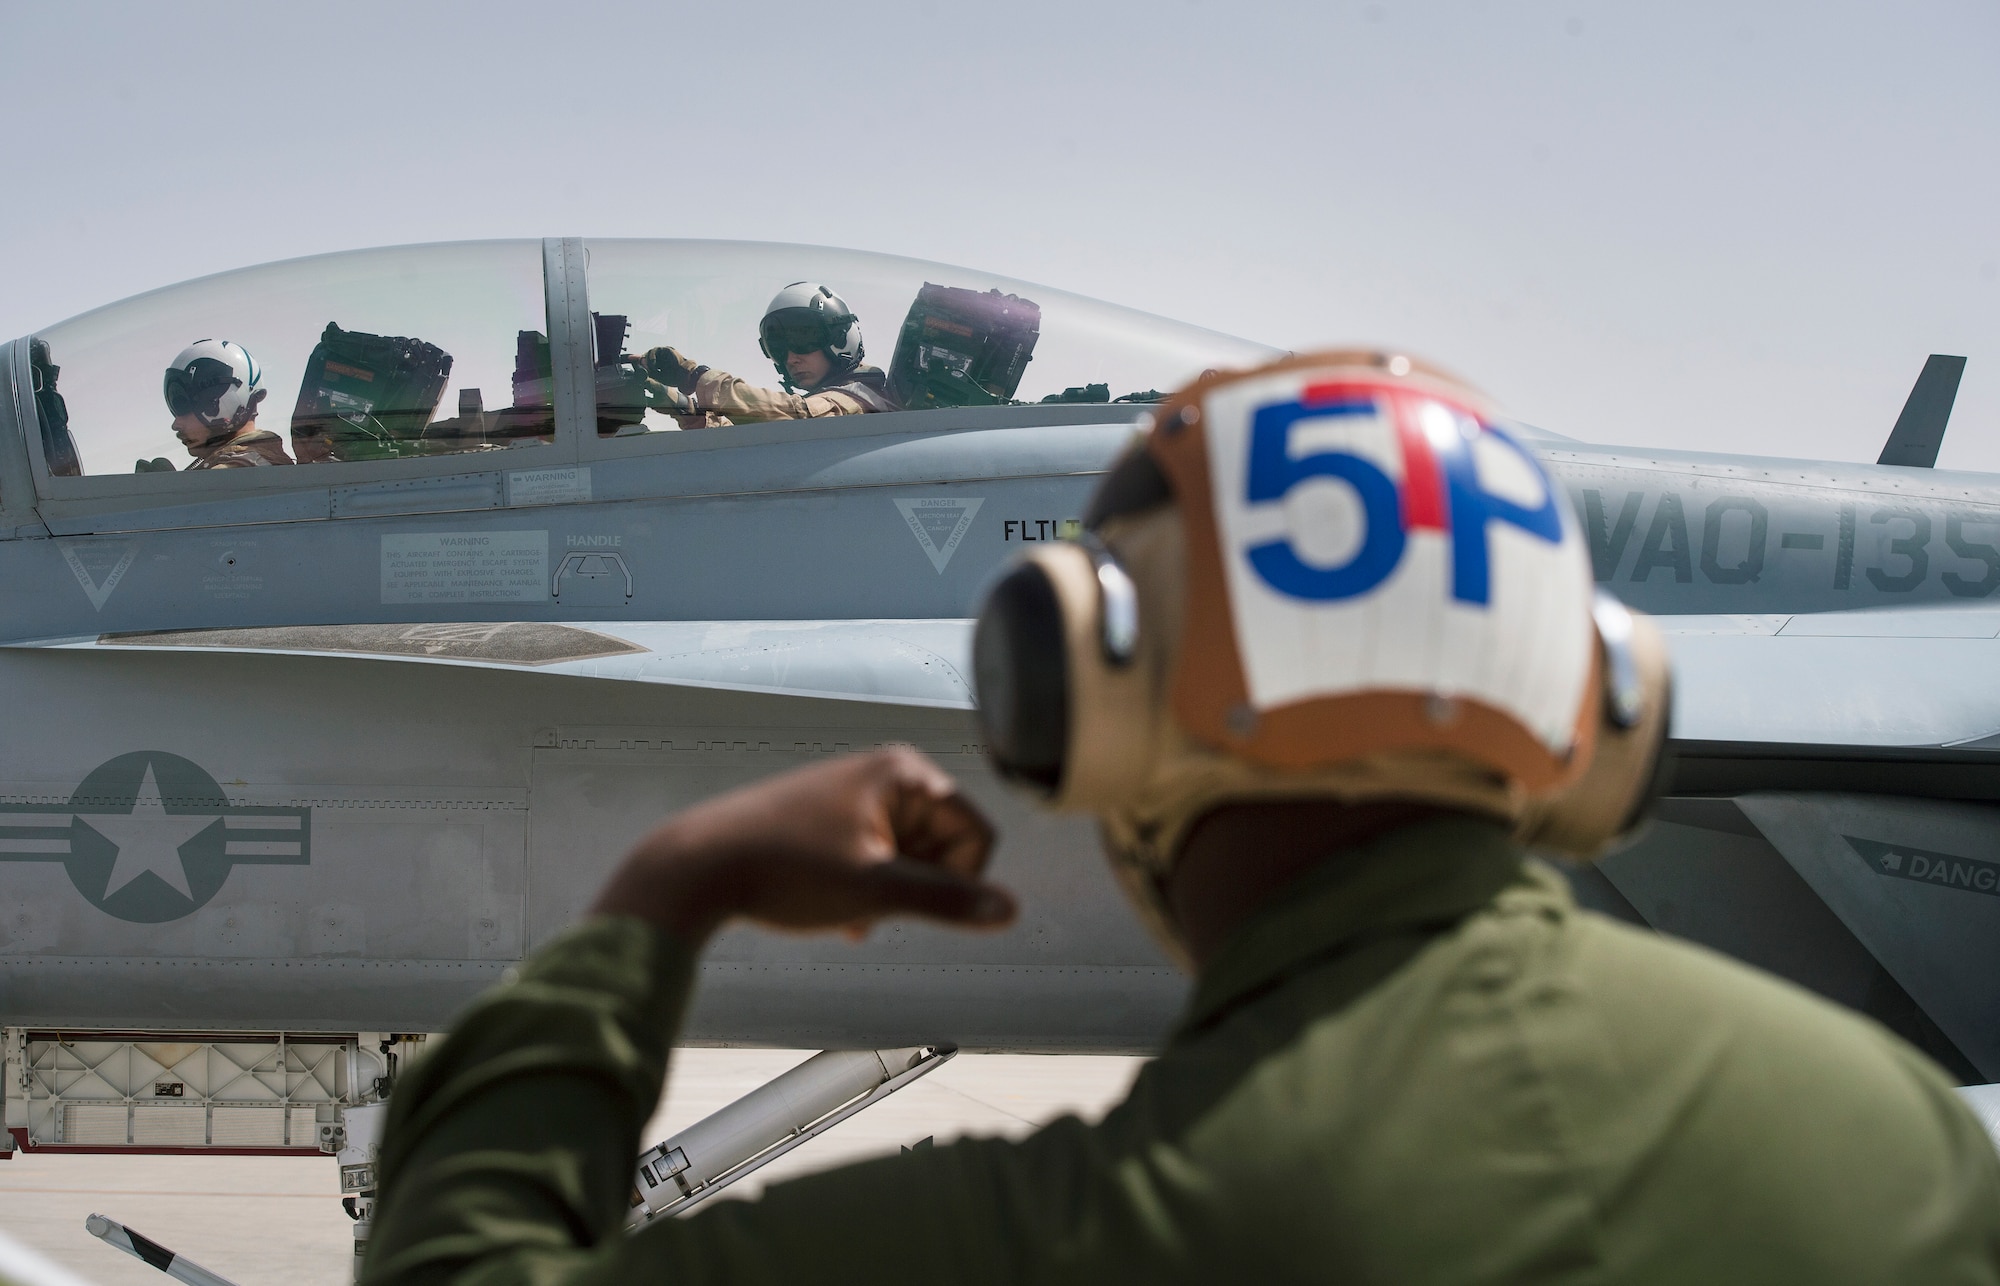 U.S. Navy EA-18G Growler pilots from the Electronic Attack Squadron 135 (VAQ-135) “Black Ravens,” conduct pre-flight inspections for an EA-18G Growler, with the help of a VAQ-135 aircraft maintainer March 4, 2019, at Al Udeid Air Base, Qatar. VAQ-135 is deployed to the U.S. 5th Fleet area of operations in support of naval operations to ensure maritime stability and security in the Central Region, connecting the Mediterranean and the Pacific through the western Indian Ocean and three strategic choke points. The squadron’s EA-18G Growlers employ an electronic attack capability in support of combat missions across the region. (U.S. Air Force photo by Tech. Sgt. Christopher Hubenthal)